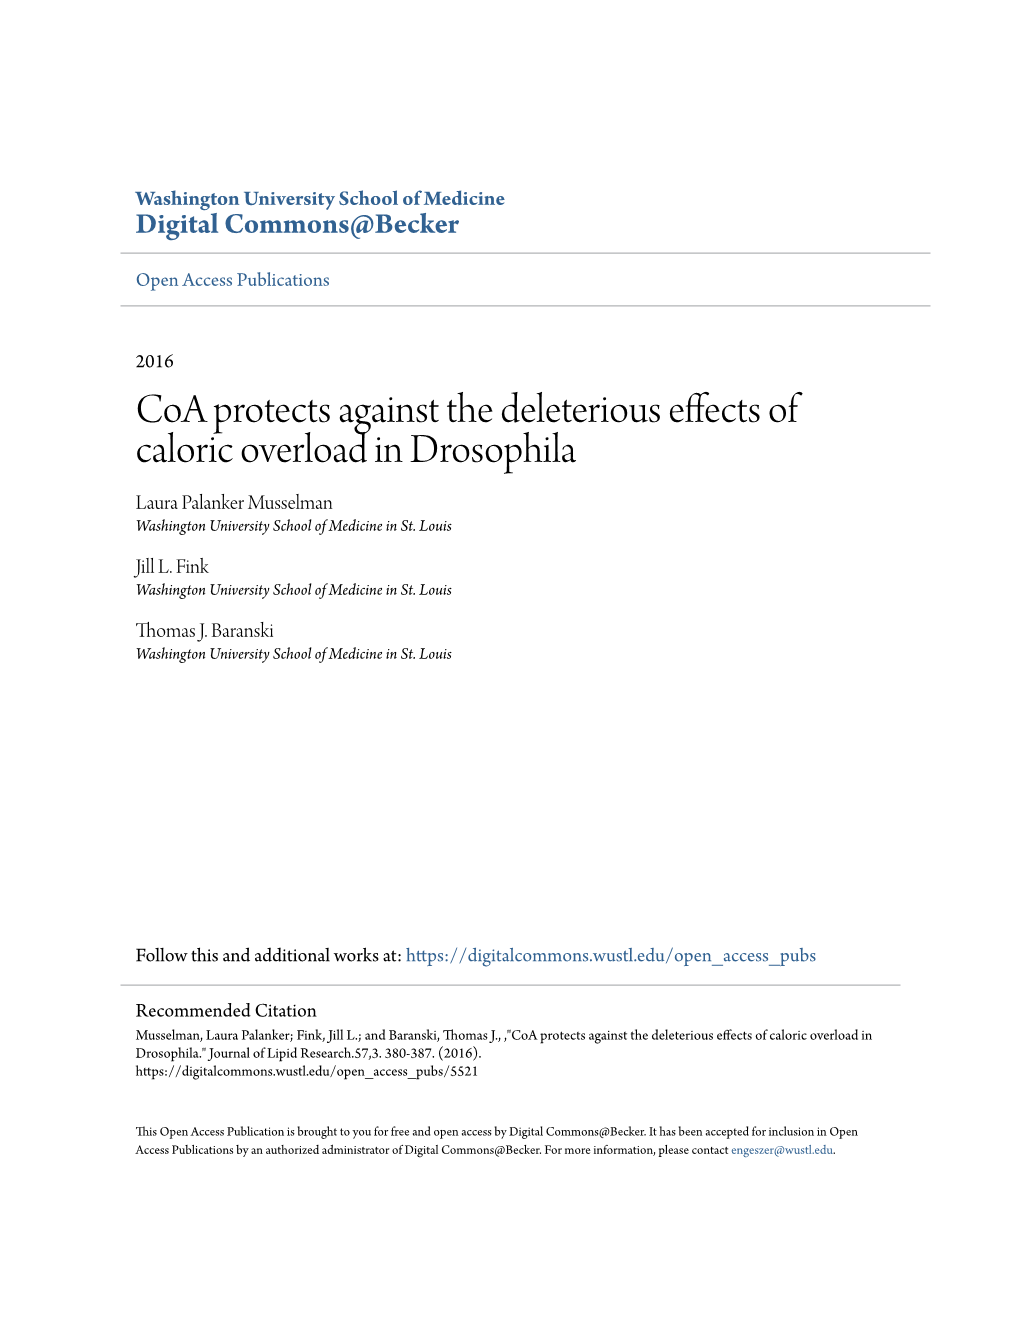 Coa Protects Against the Deleterious Effects of Caloric Overload in Drosophila Laura Palanker Musselman Washington University School of Medicine in St